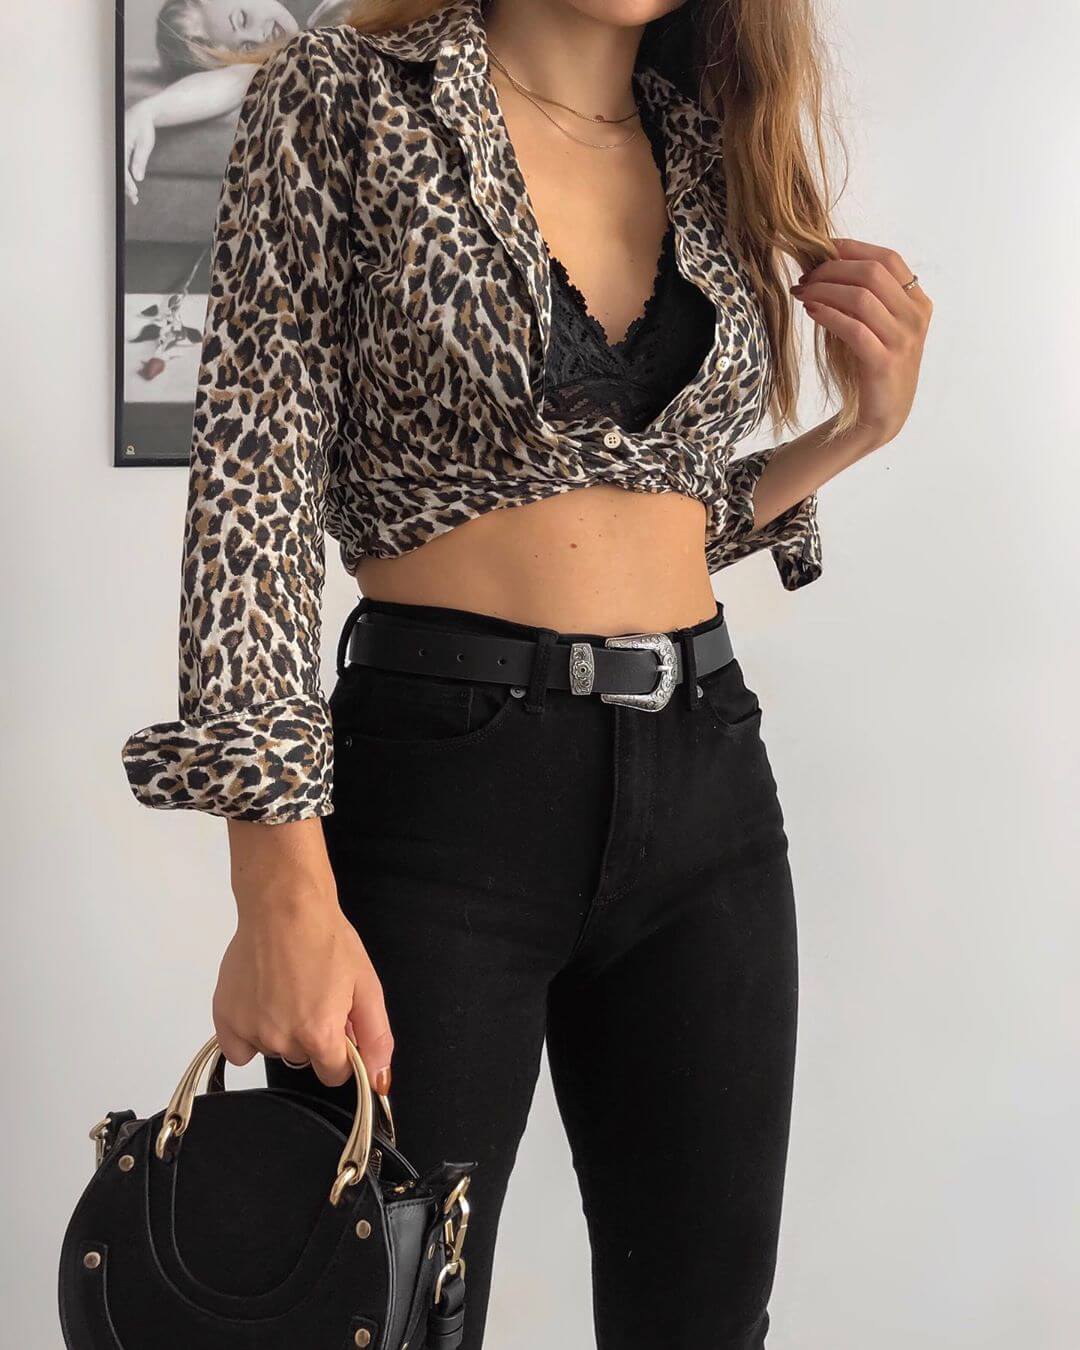 Animal Print Tops with black jeans